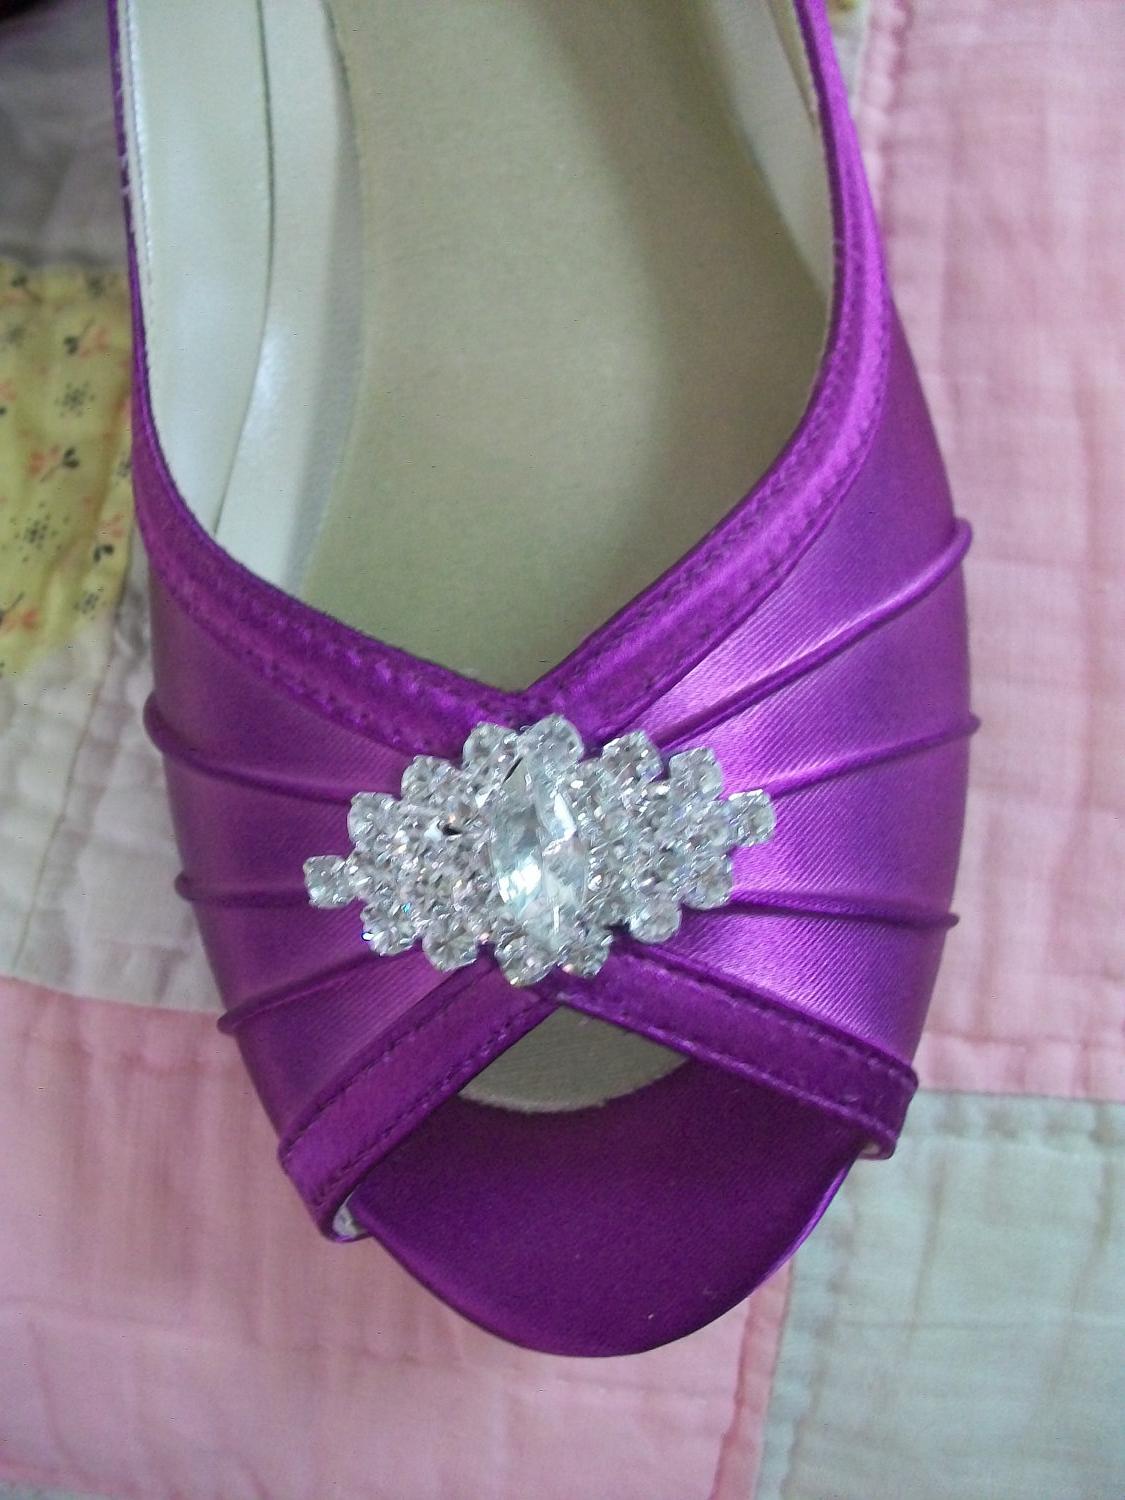 One Inch Wedge Wedding Shoes